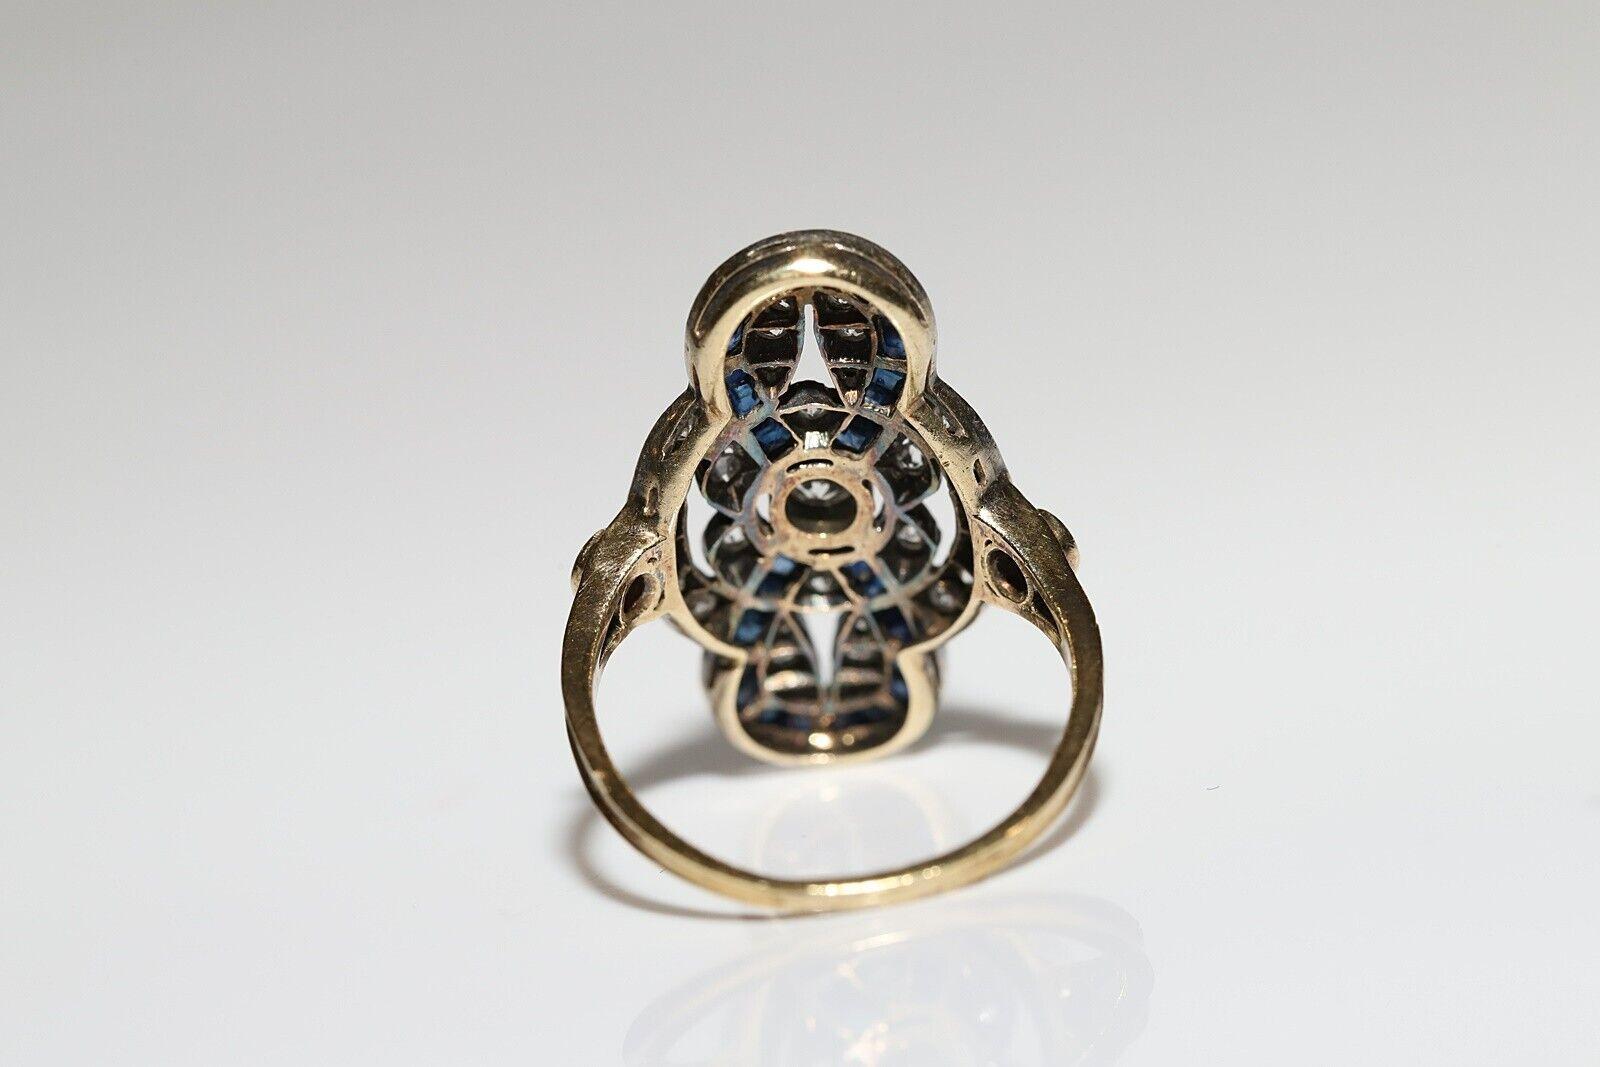 Brilliant Cut Vintage Circa 1980s 18k Gold Natural Diamond And Caliber Sapphire Decorated Ring For Sale